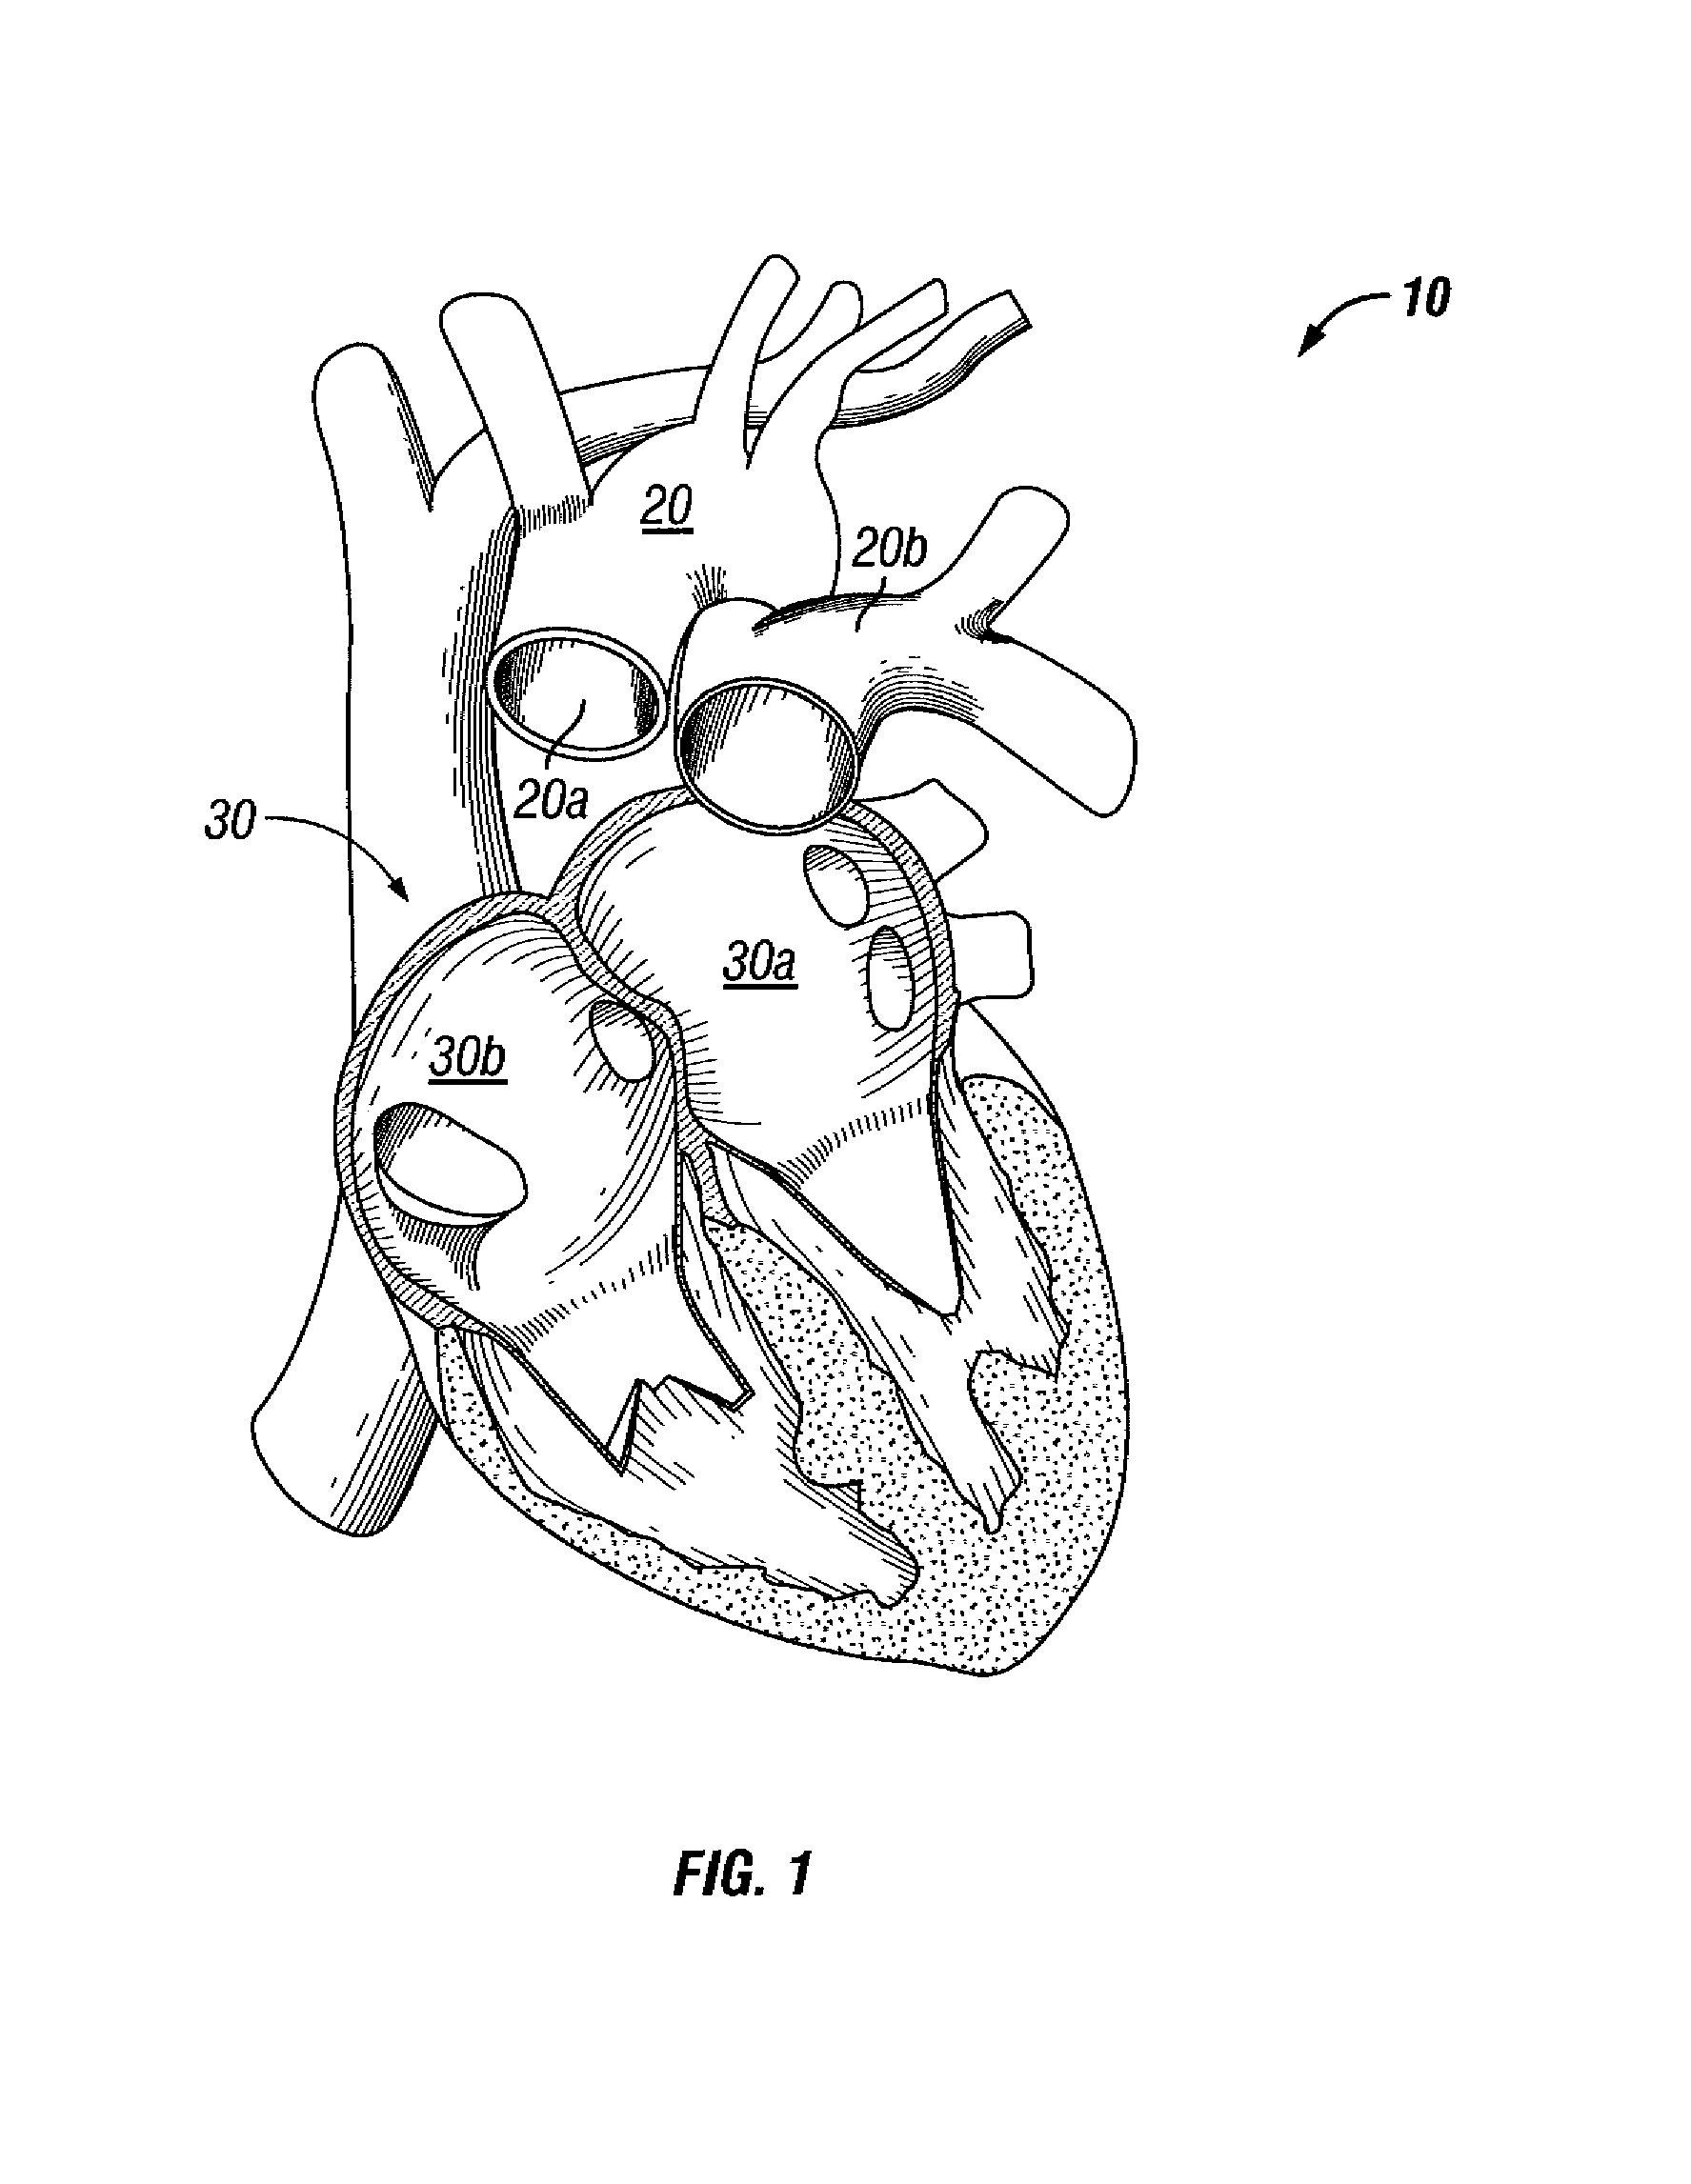 Total artificial heart system for auto-regulating flow and pressure